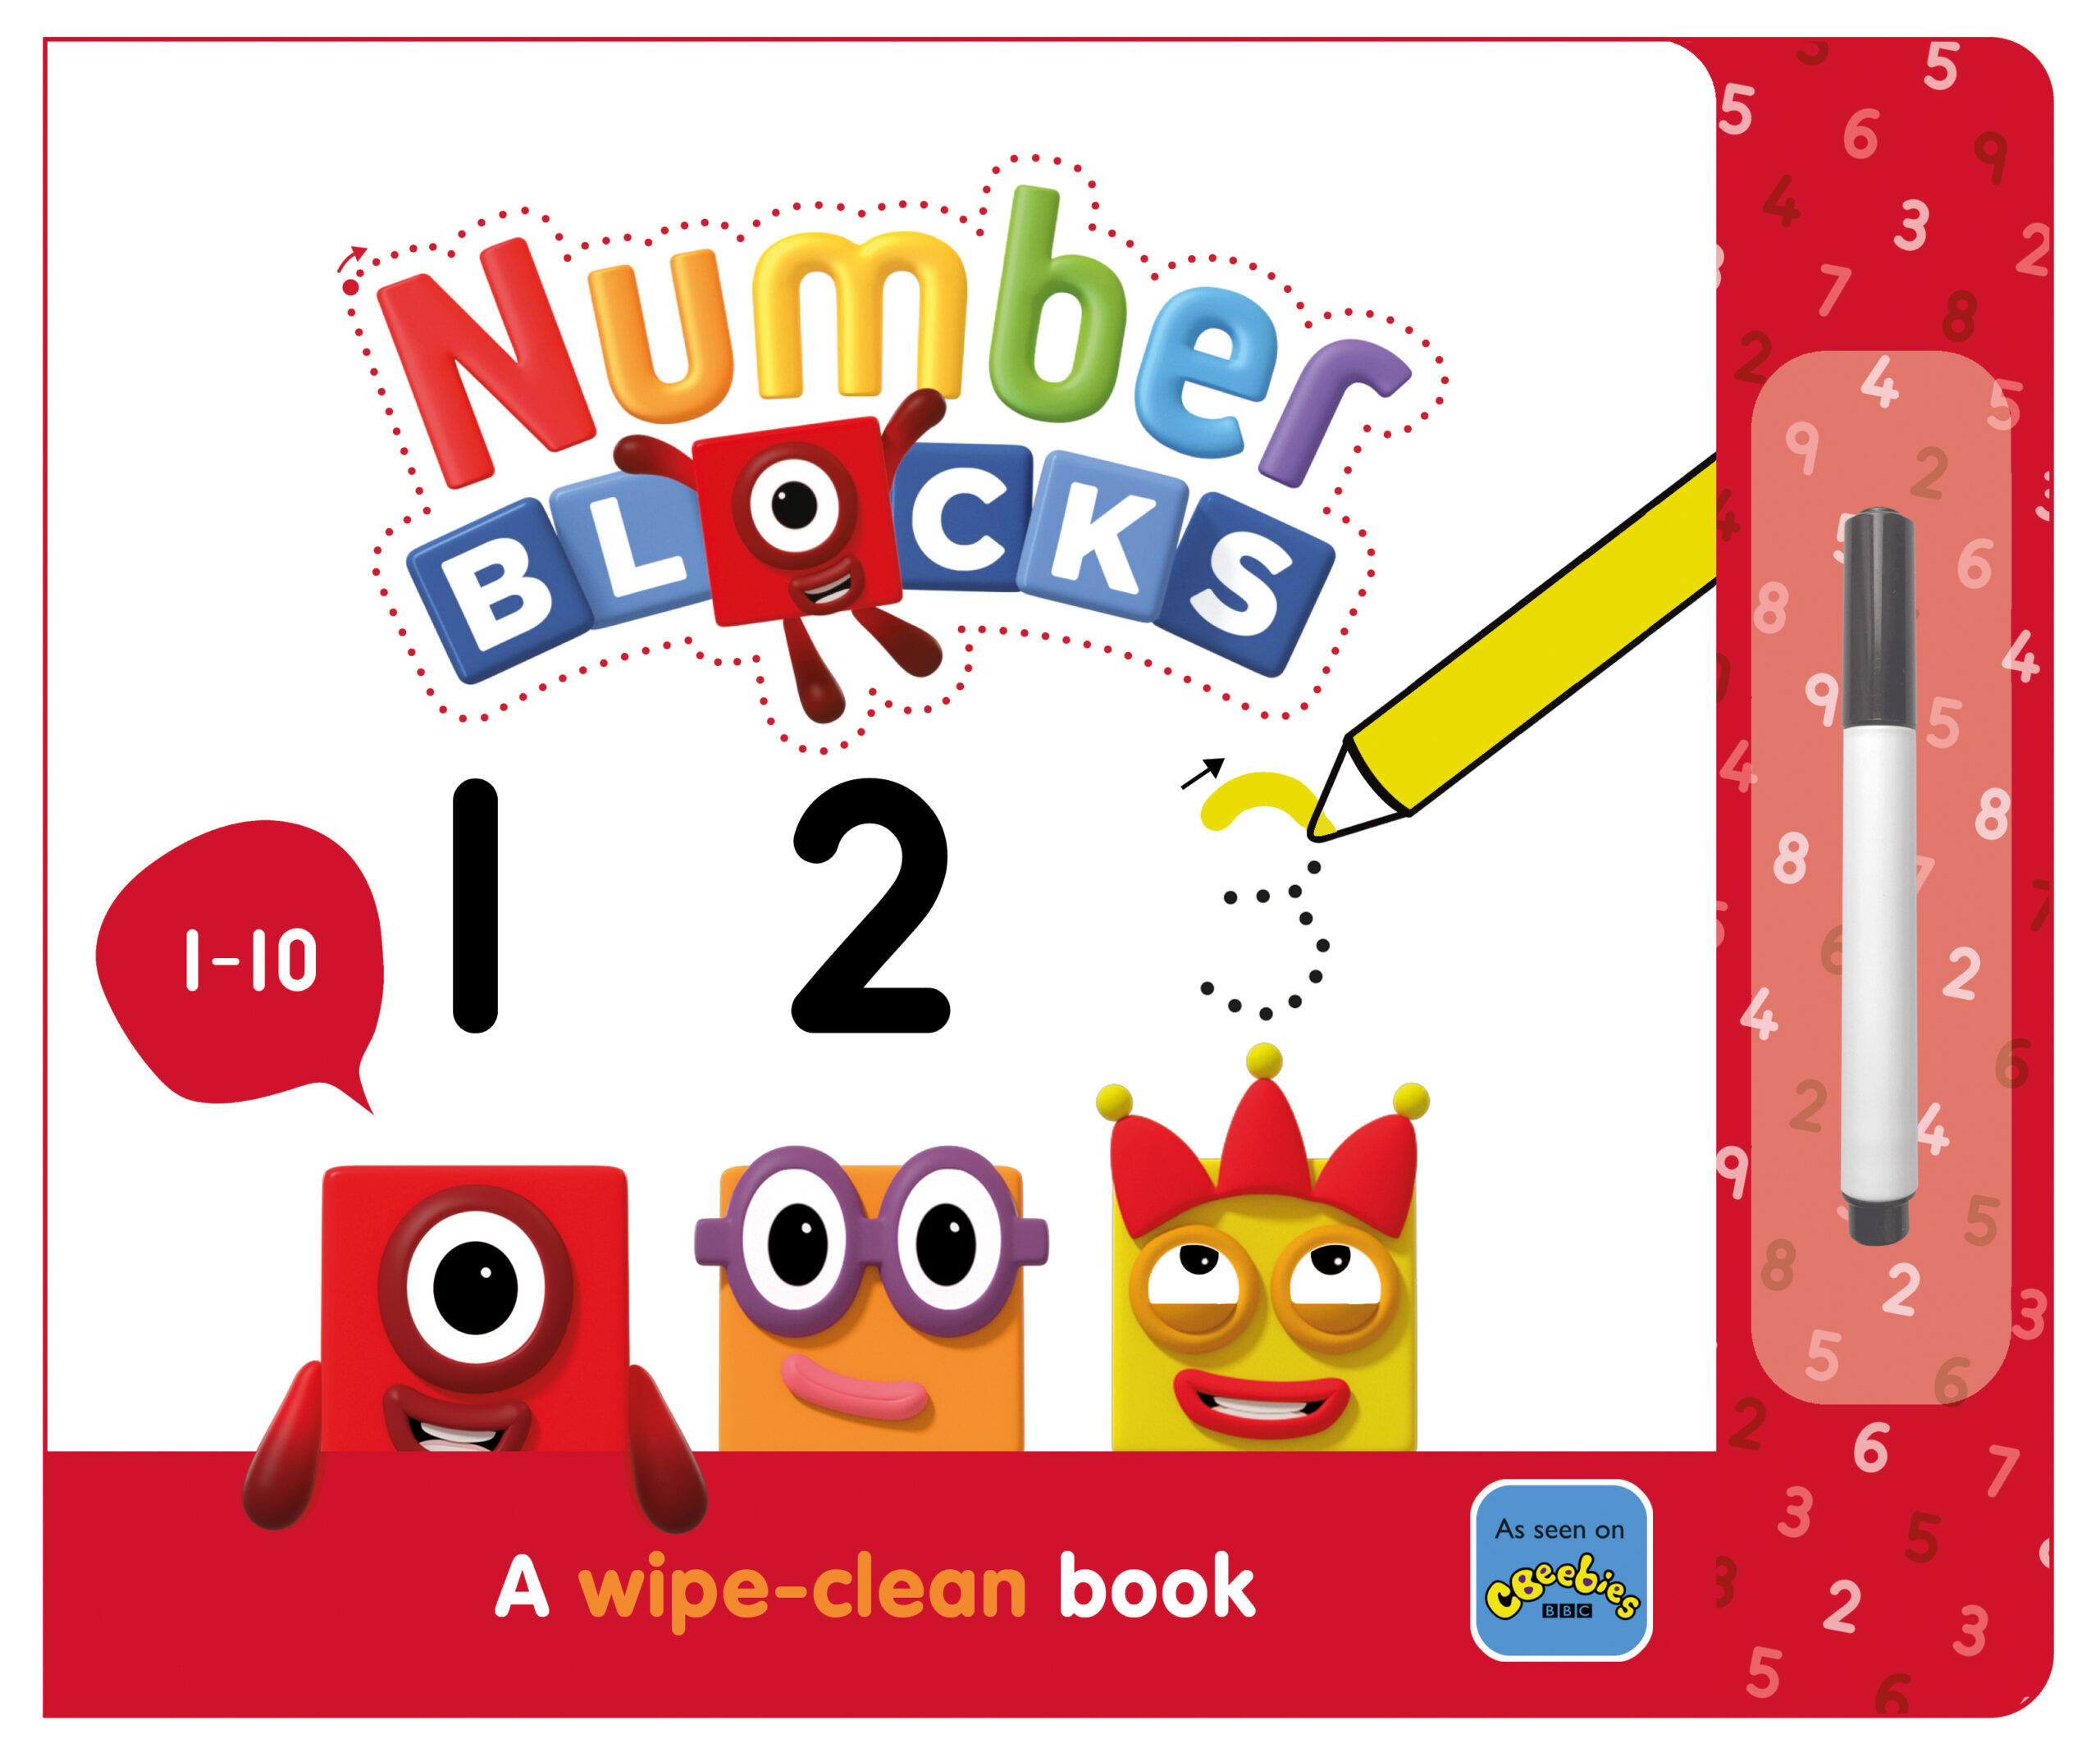 Details about   CBeebies Numberblocks Wipe Clean Activity Cards New from Number Blocks in 2021 